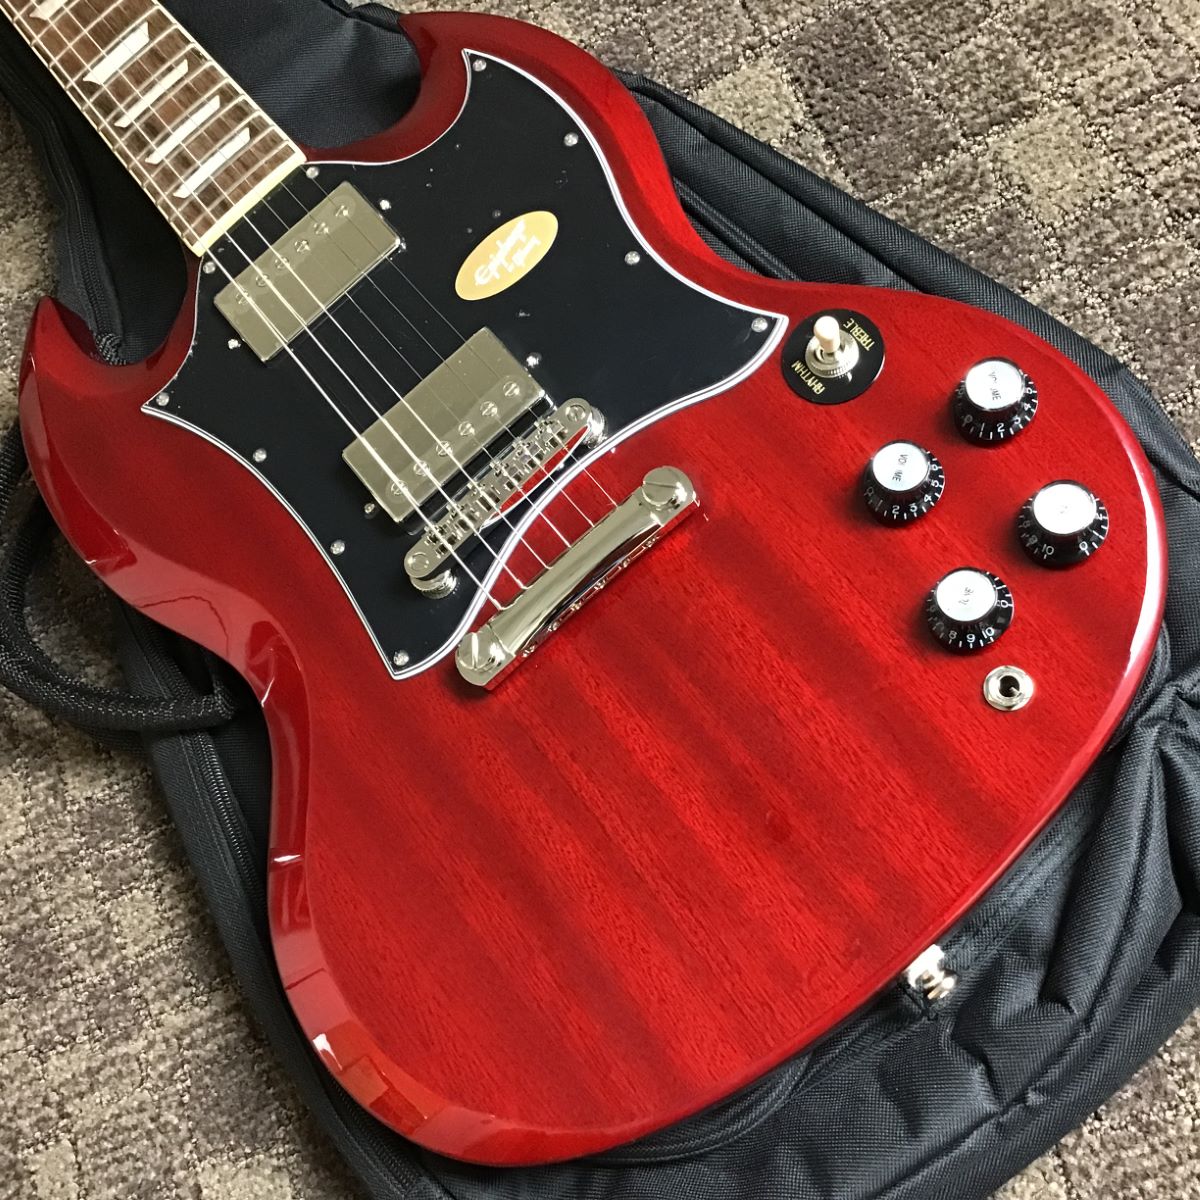 Epiphone SG Limited Edition（ソフトケース付き） - エレキギター